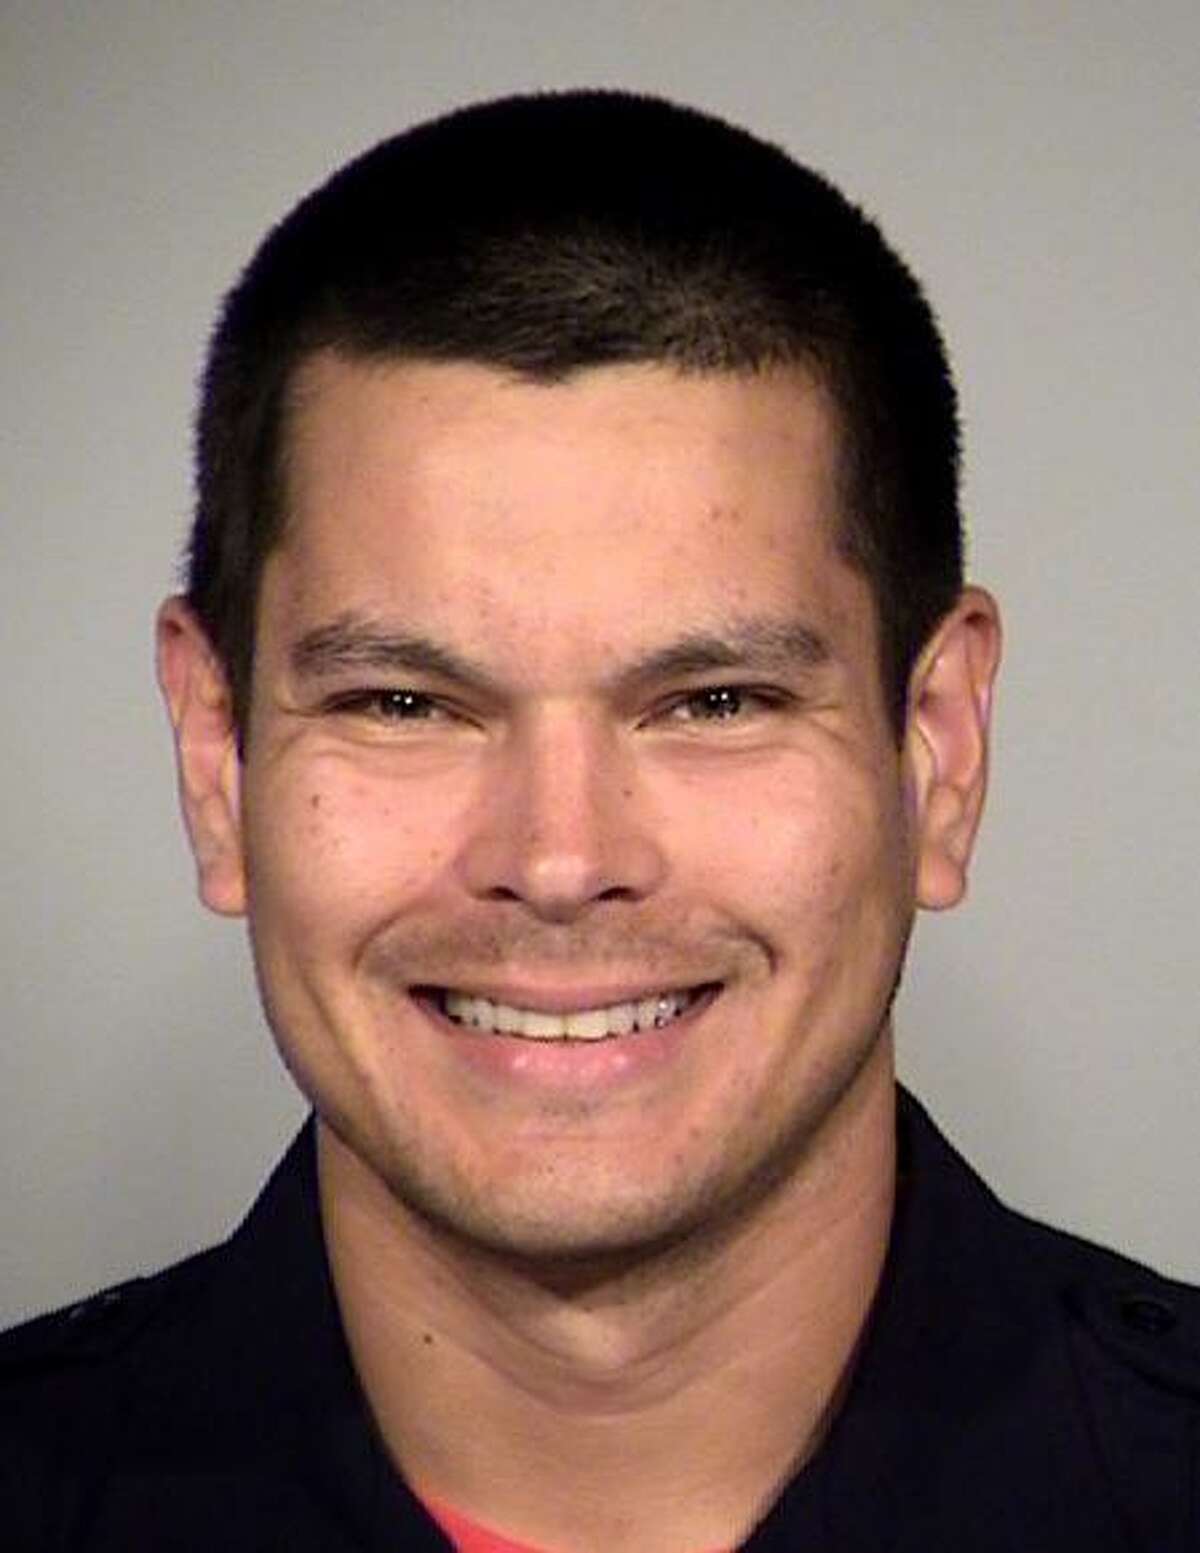 Officer Matthew Luckhurst, accused of feeding a human fecal sandwich to a homeless individual in San Antonio.